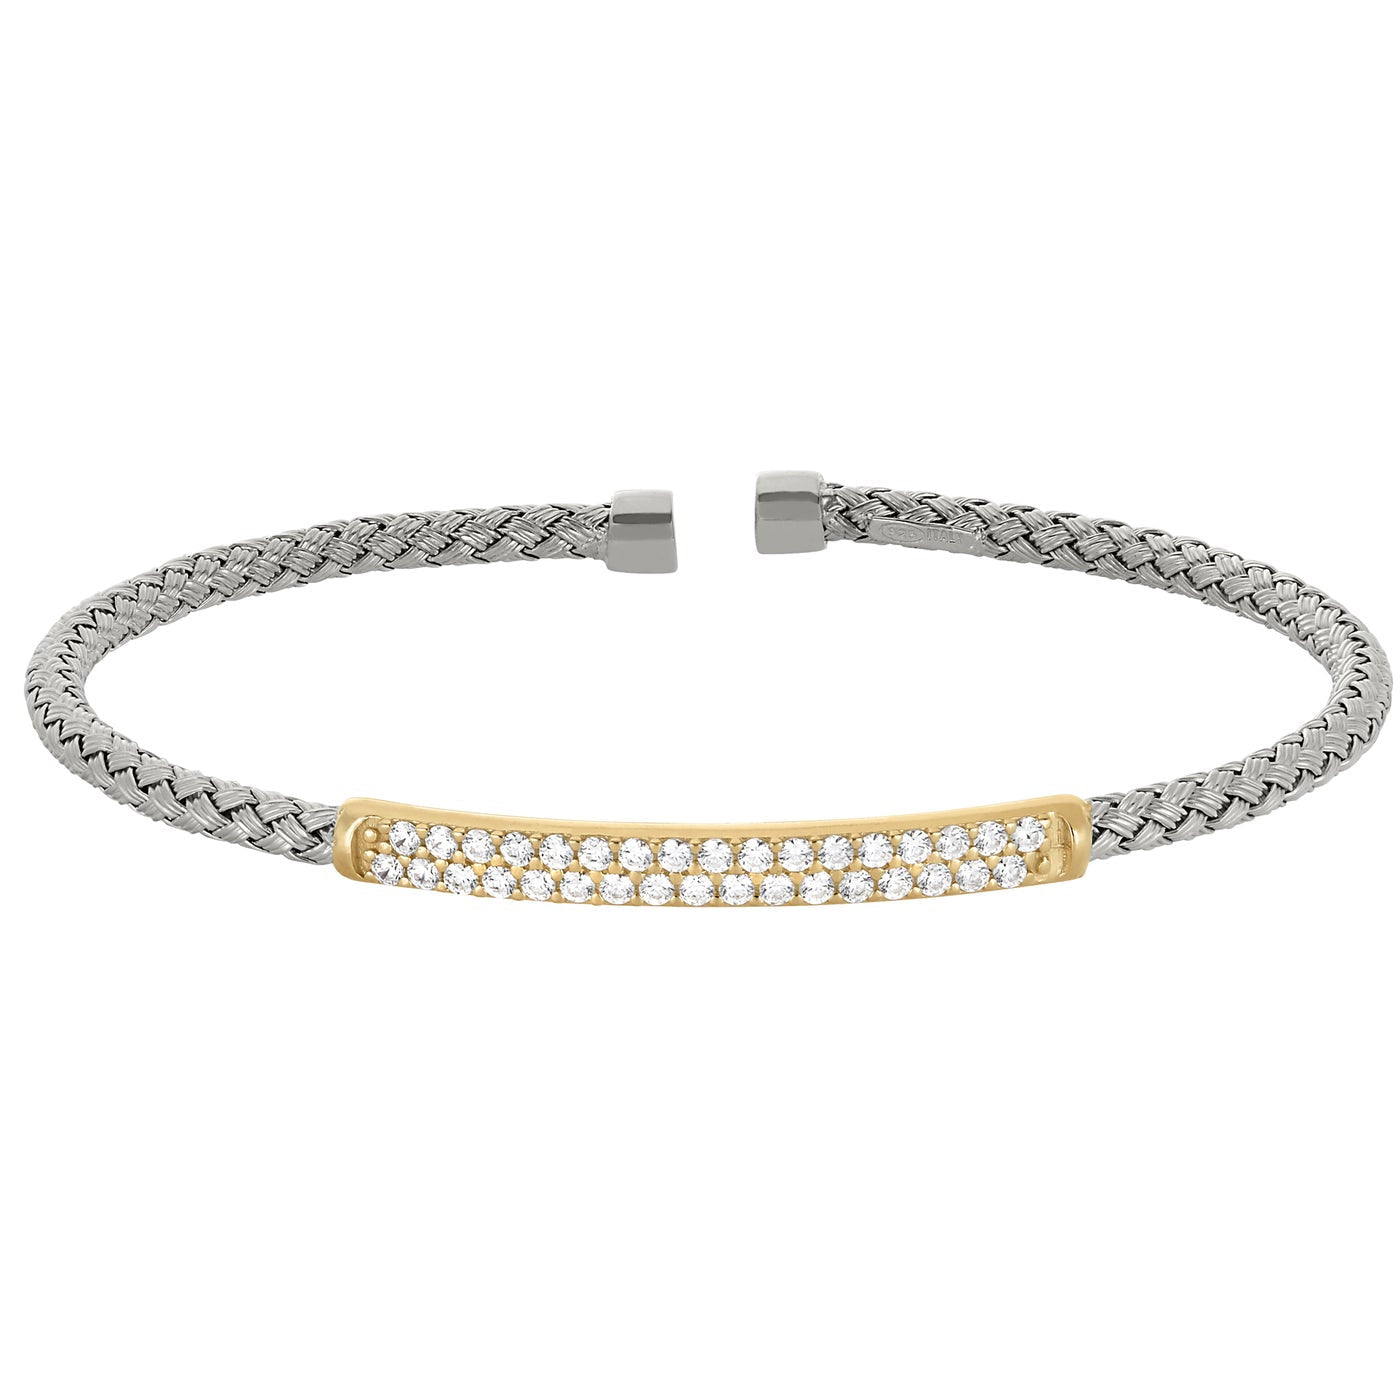 A basketweave sterling silver bracelet with double rows of simulated diamonds displayed on a neutral white background.